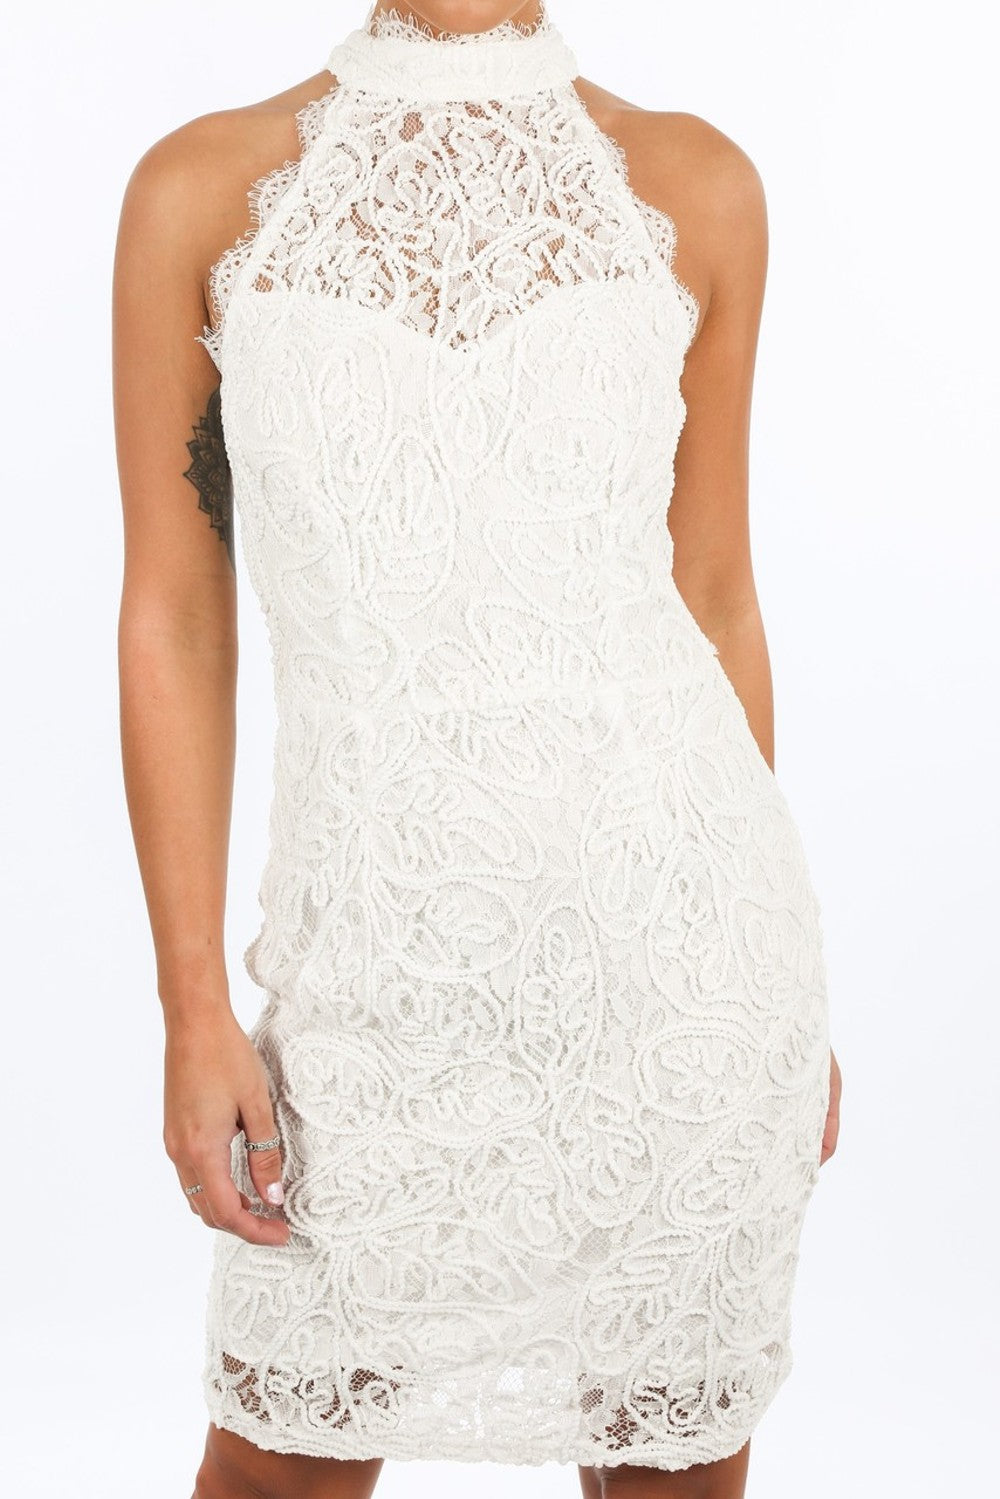 White High Neck Braided Lace Bodycon Dress